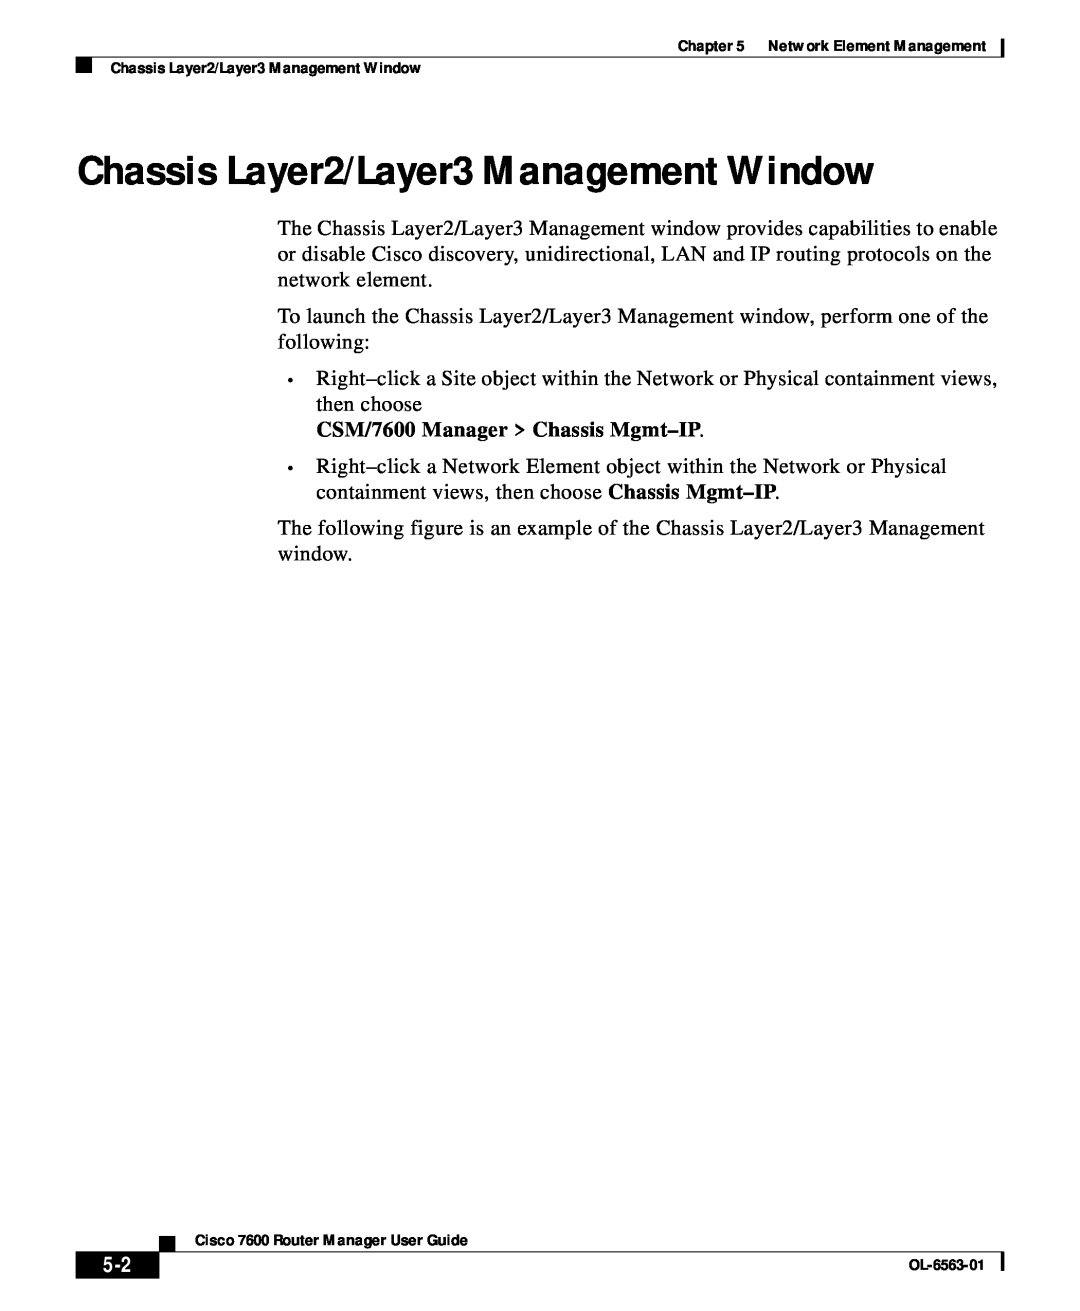 Cisco Systems OL-6563-01 manual Chassis Layer2/Layer3 Management Window, CSM/7600 Manager Chassis Mgmt-IP 